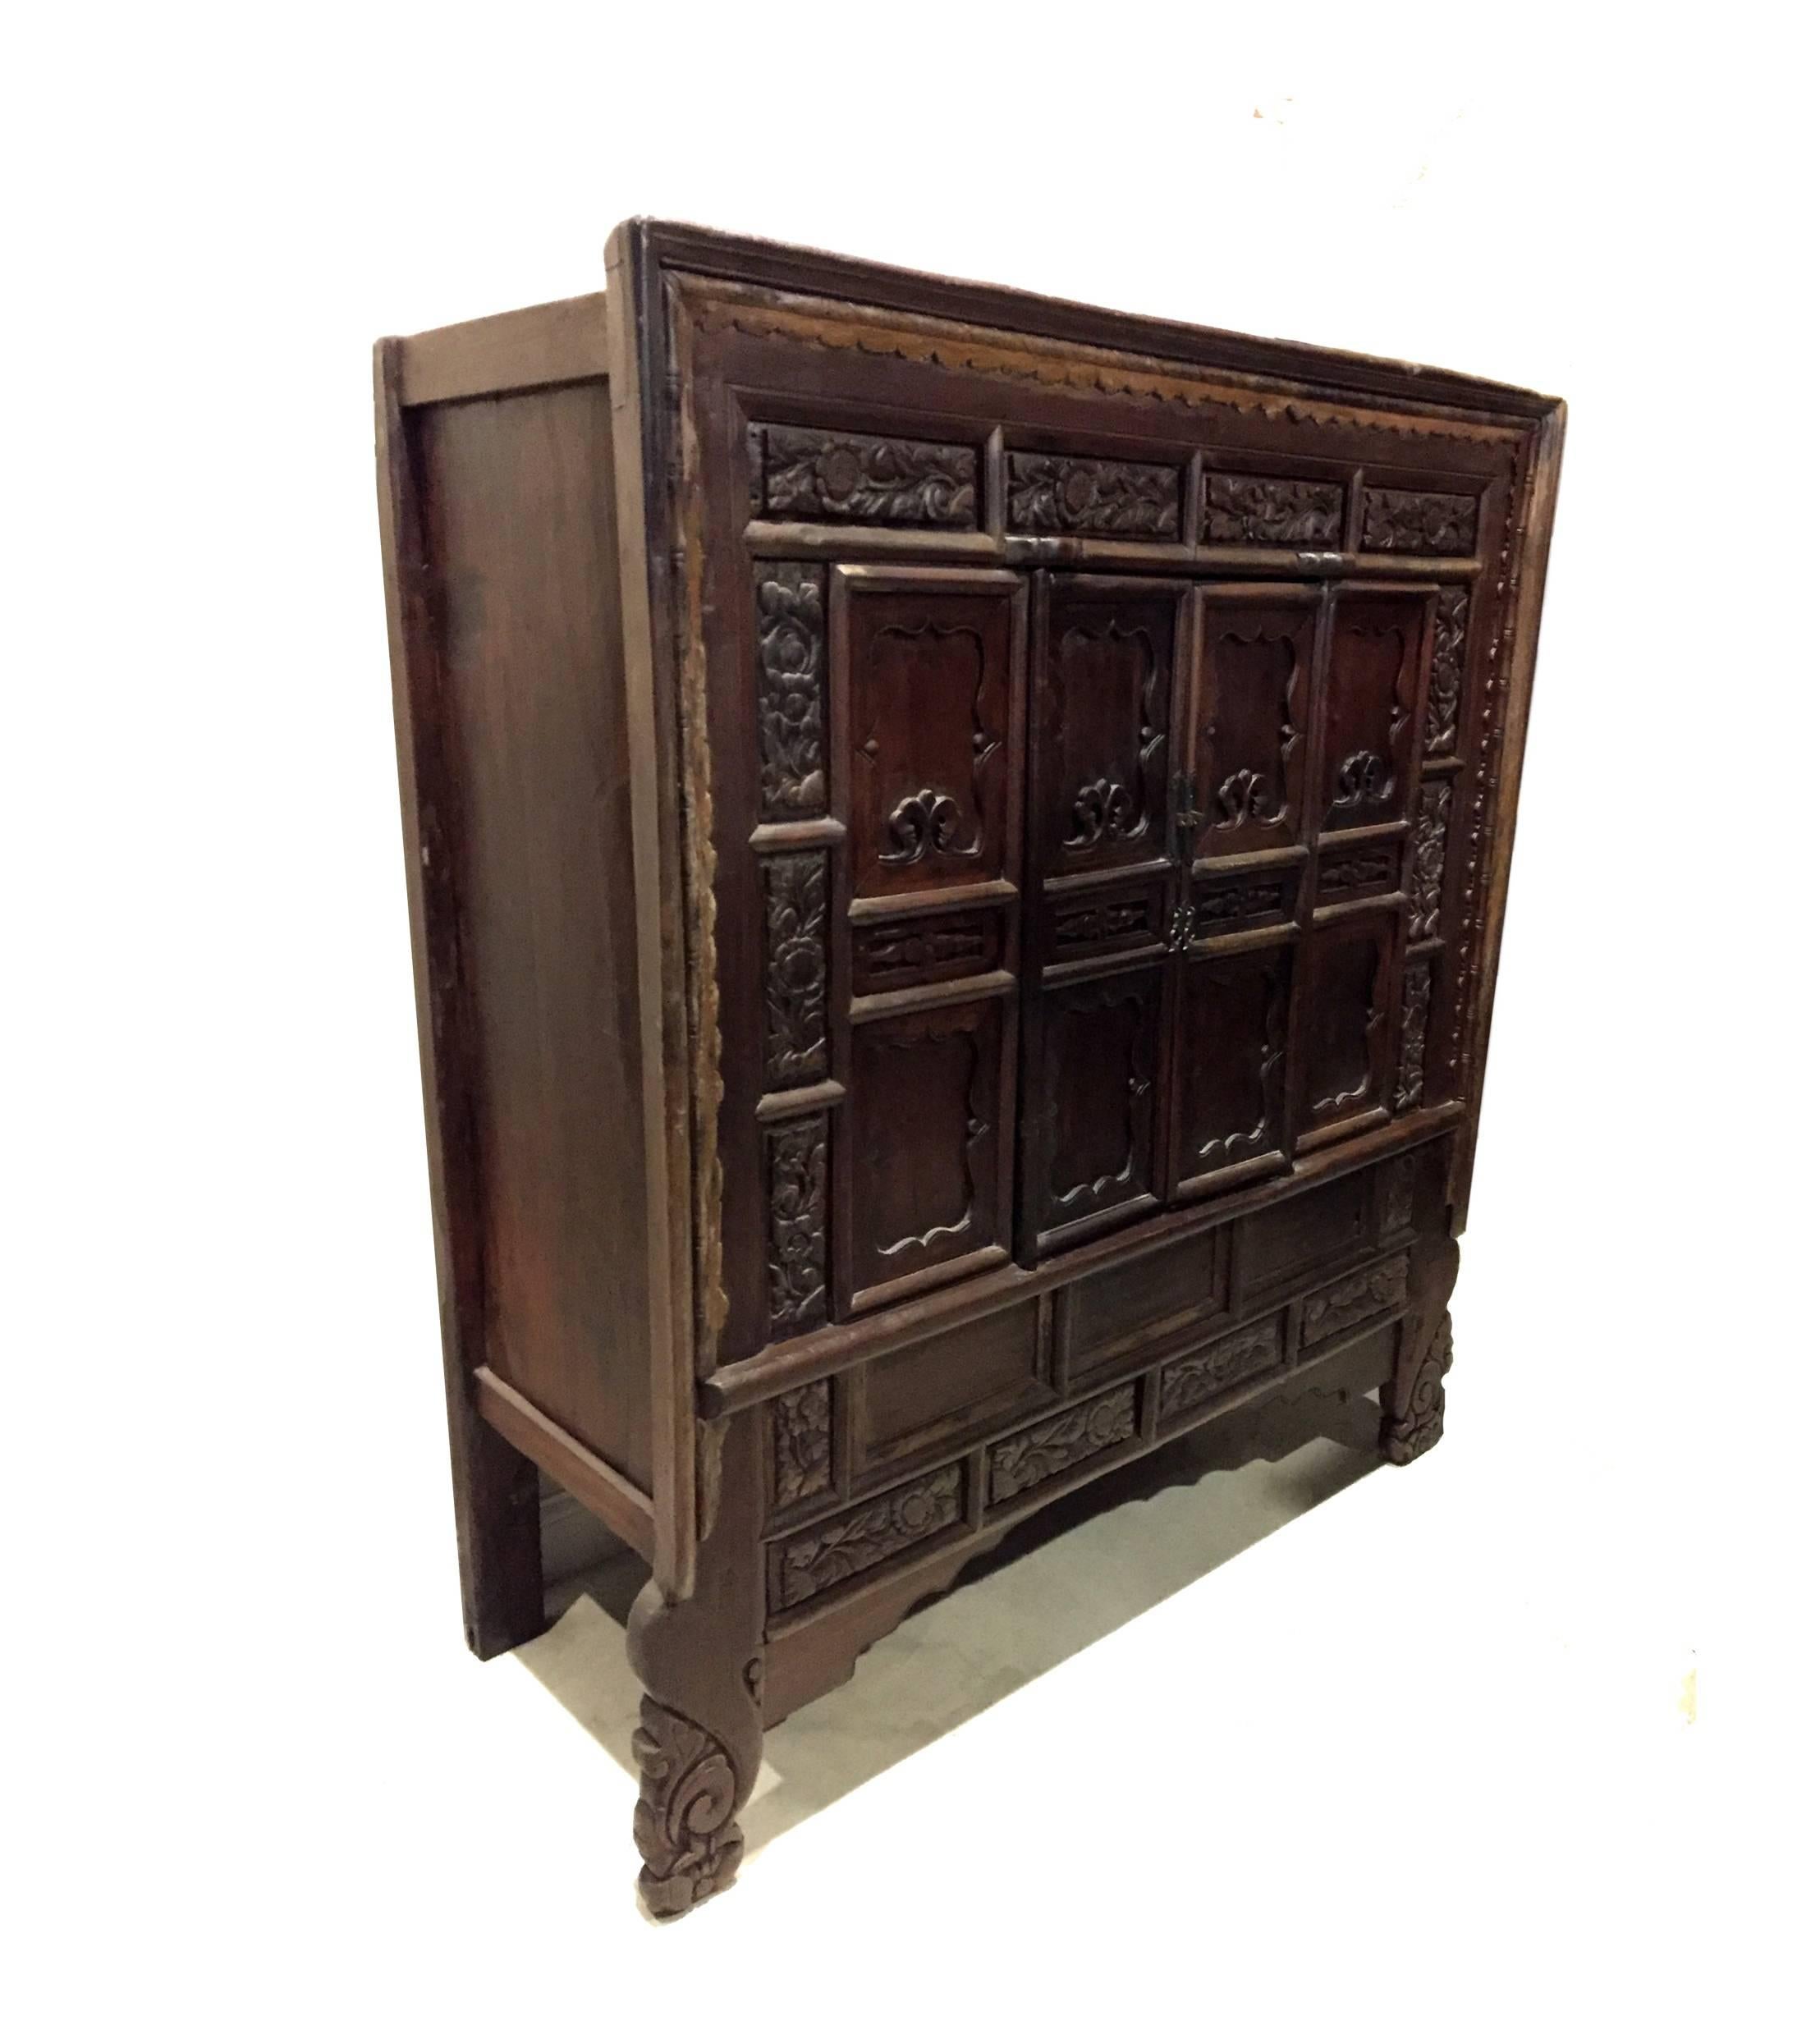 A huge General's armoire from Shan Xi province, China's ancient frontier and trade post. Commanding at over 5' wide with solid structure and bold features, this exceptional piece demonstrates all the trademarks of northern Chinese furniture. The